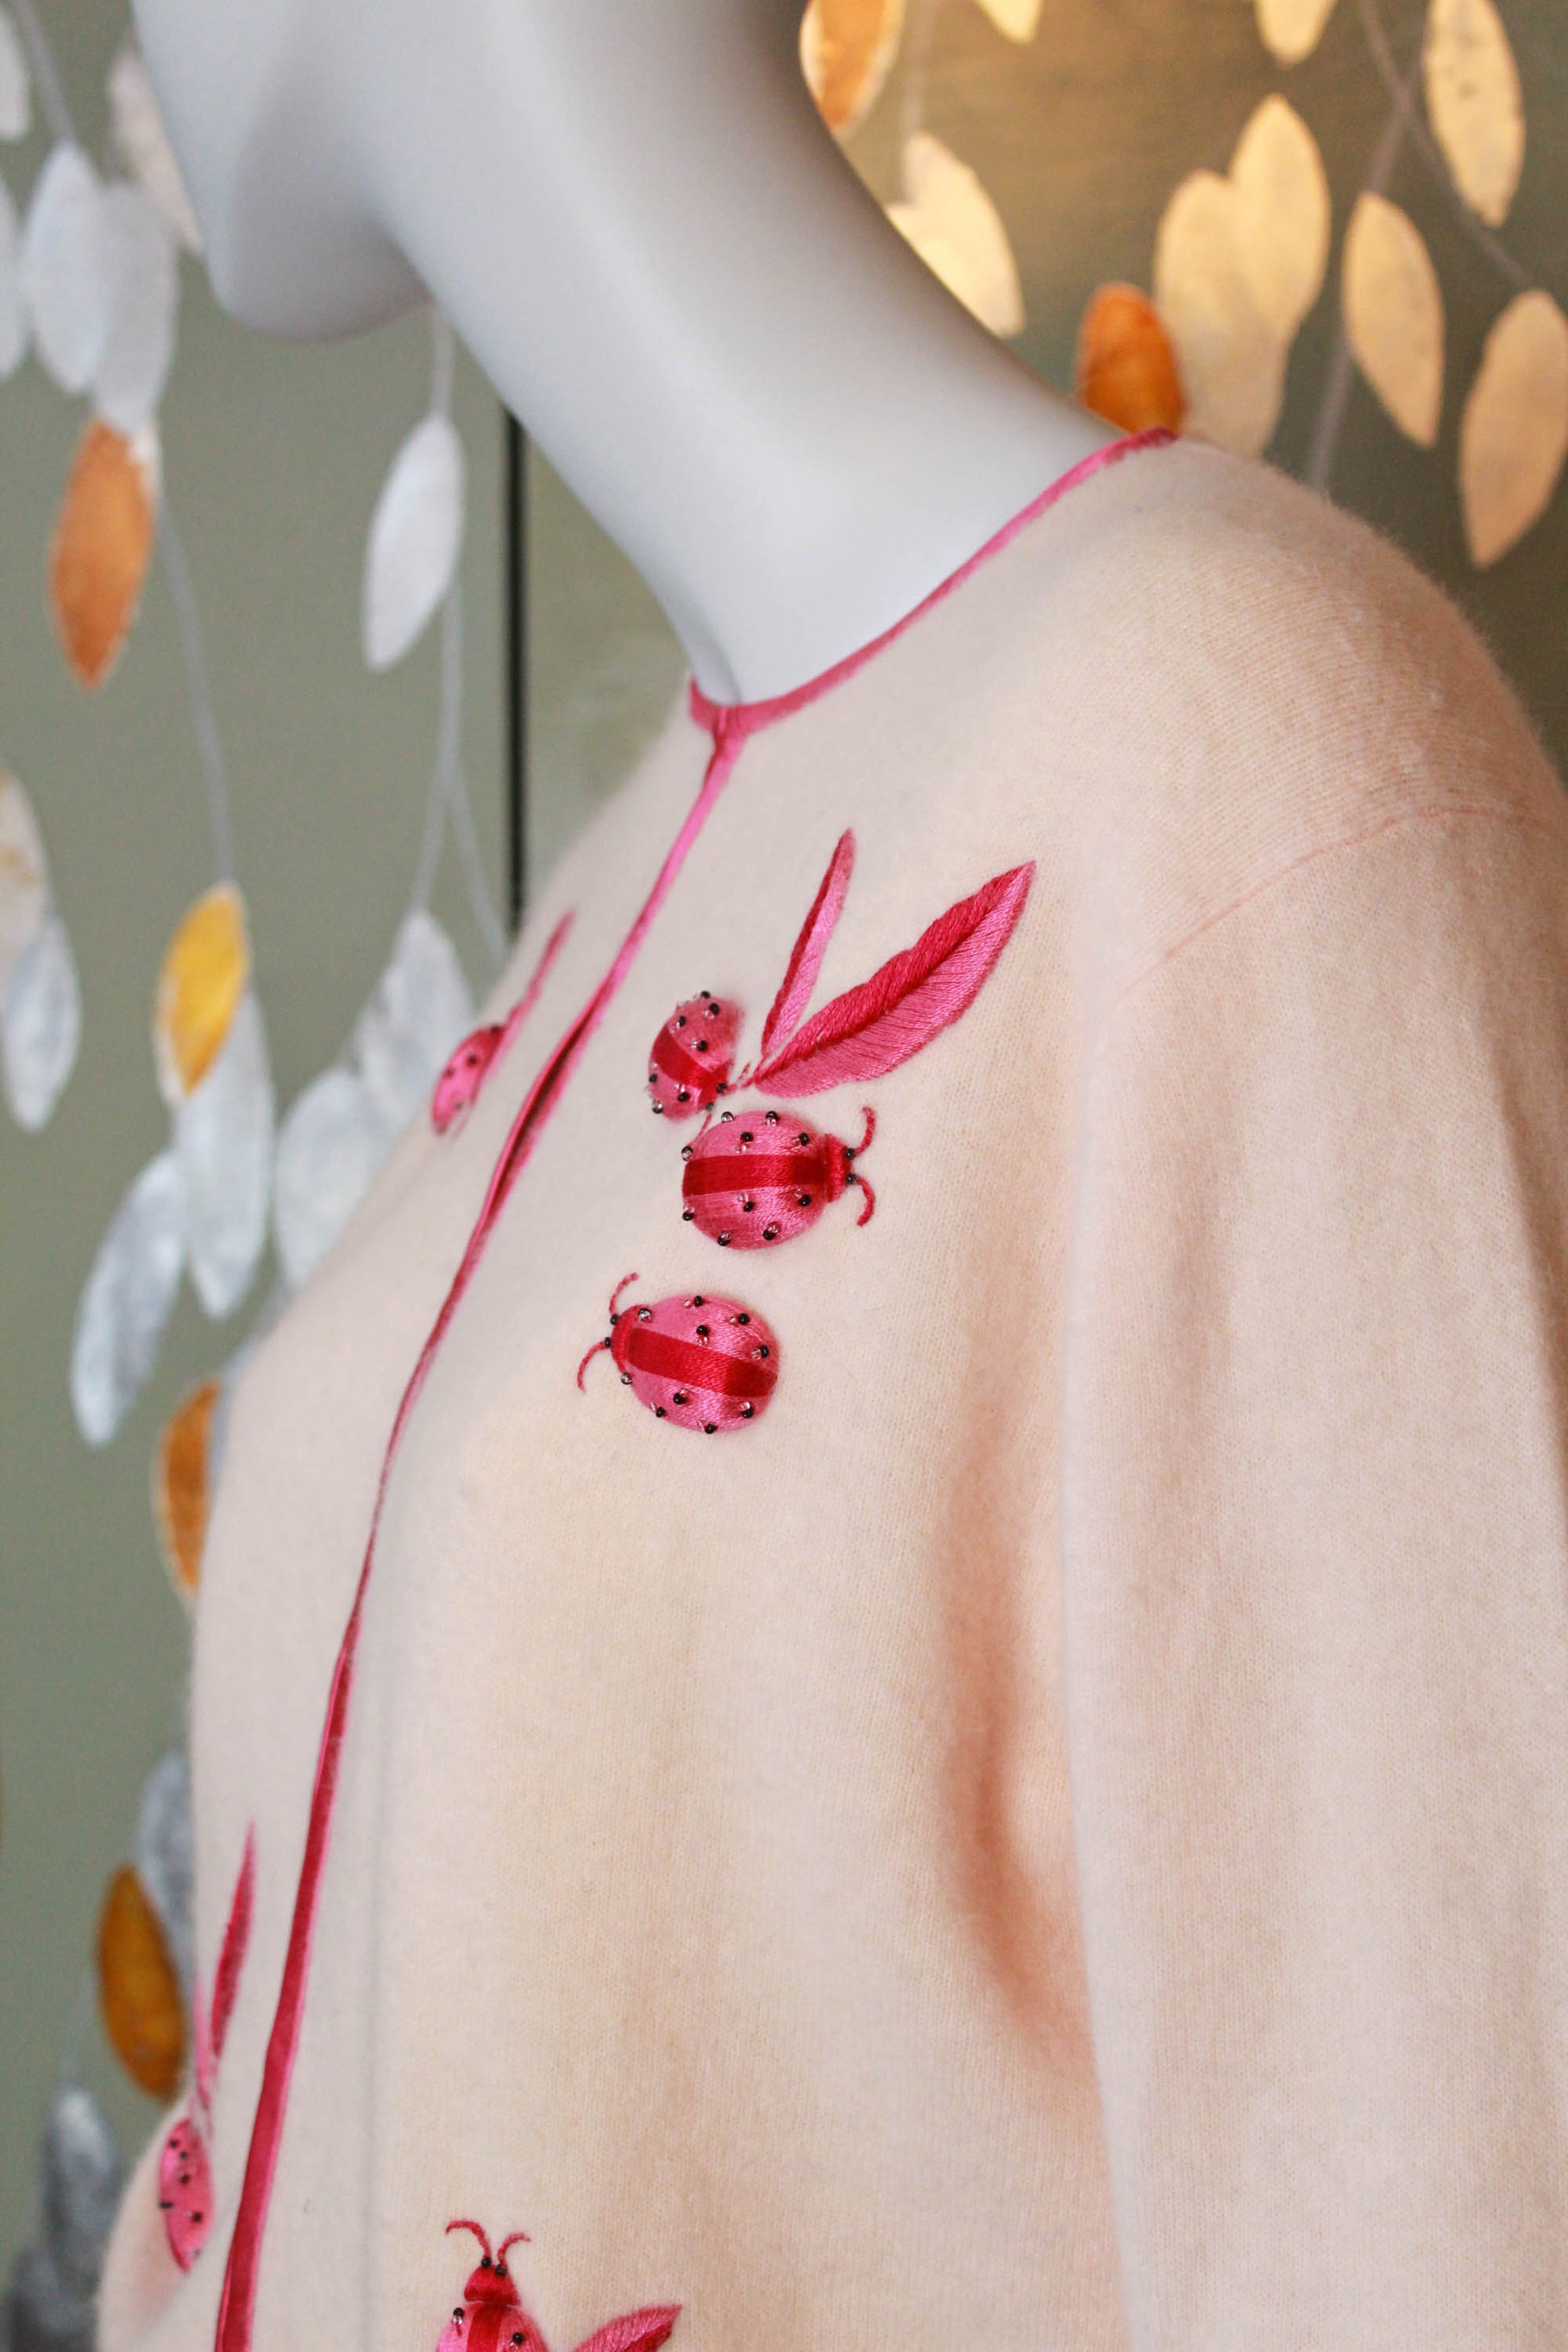 1950s lanvin cashmere pale peach pink cardigan with hot pink embroidered ladybugs and leaves, novelty vintage appliqued cardigan